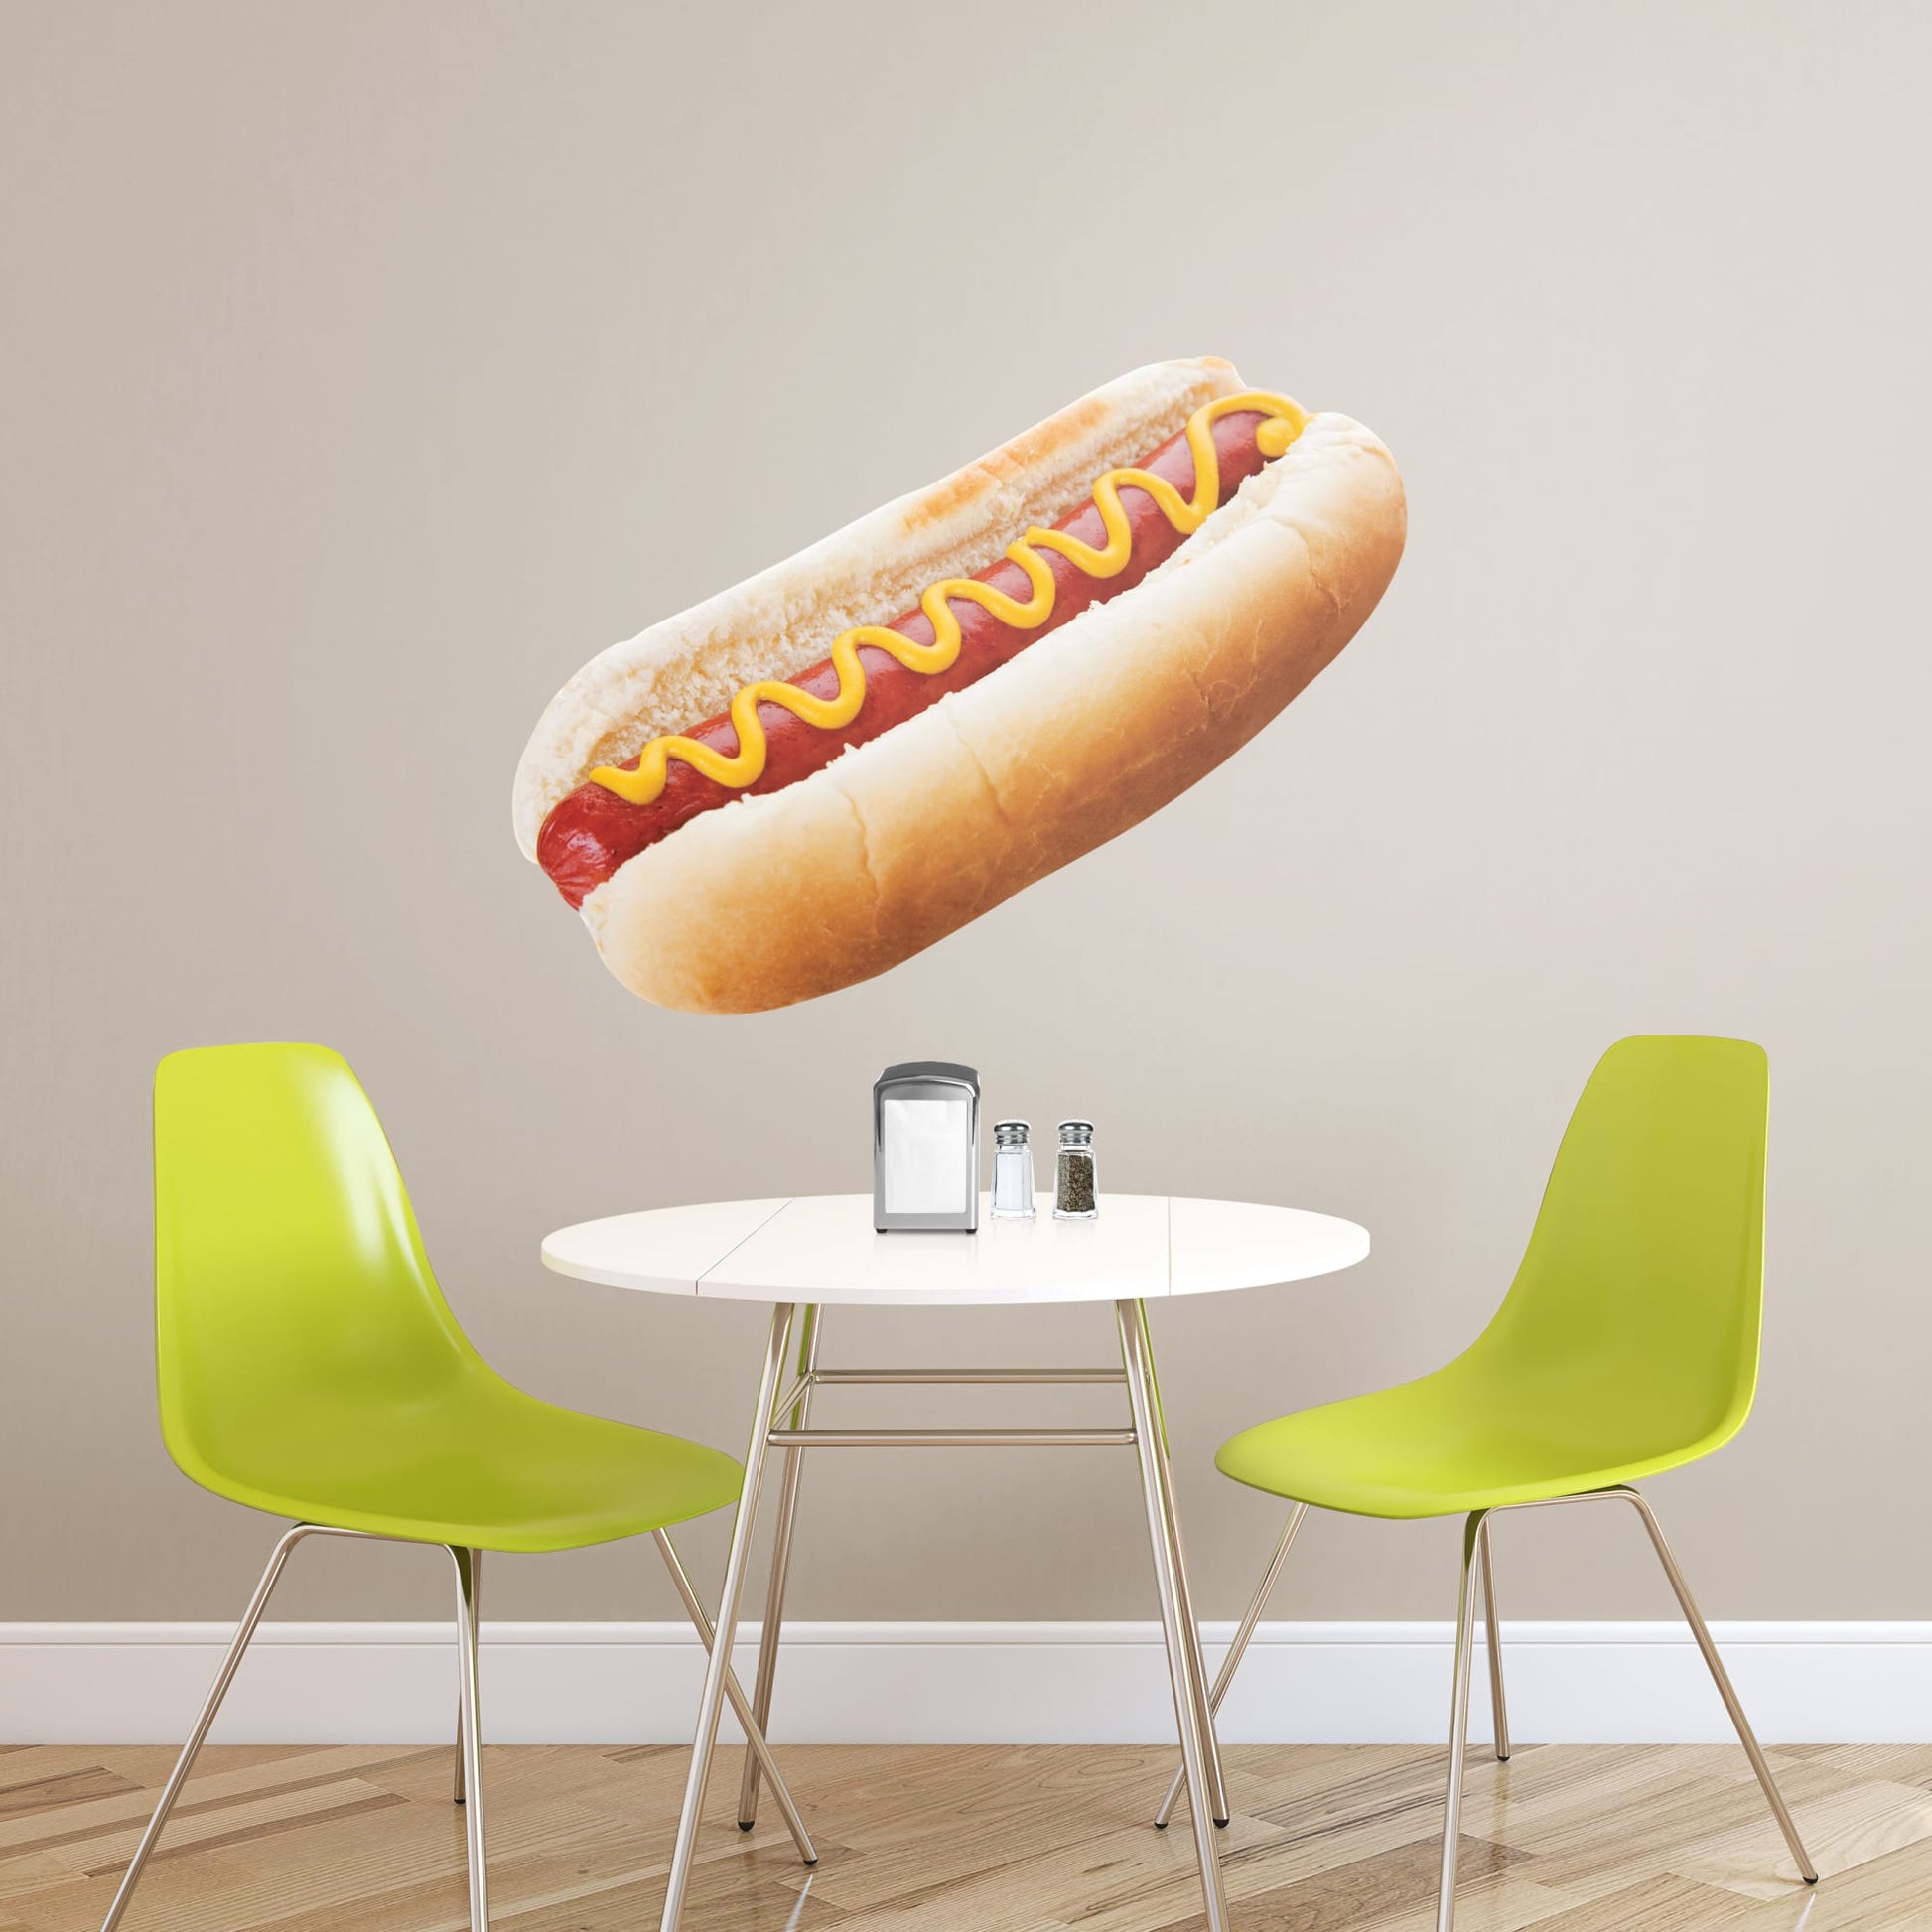 Giant Hot Dog + 2 Decals (49"W x 36"H)